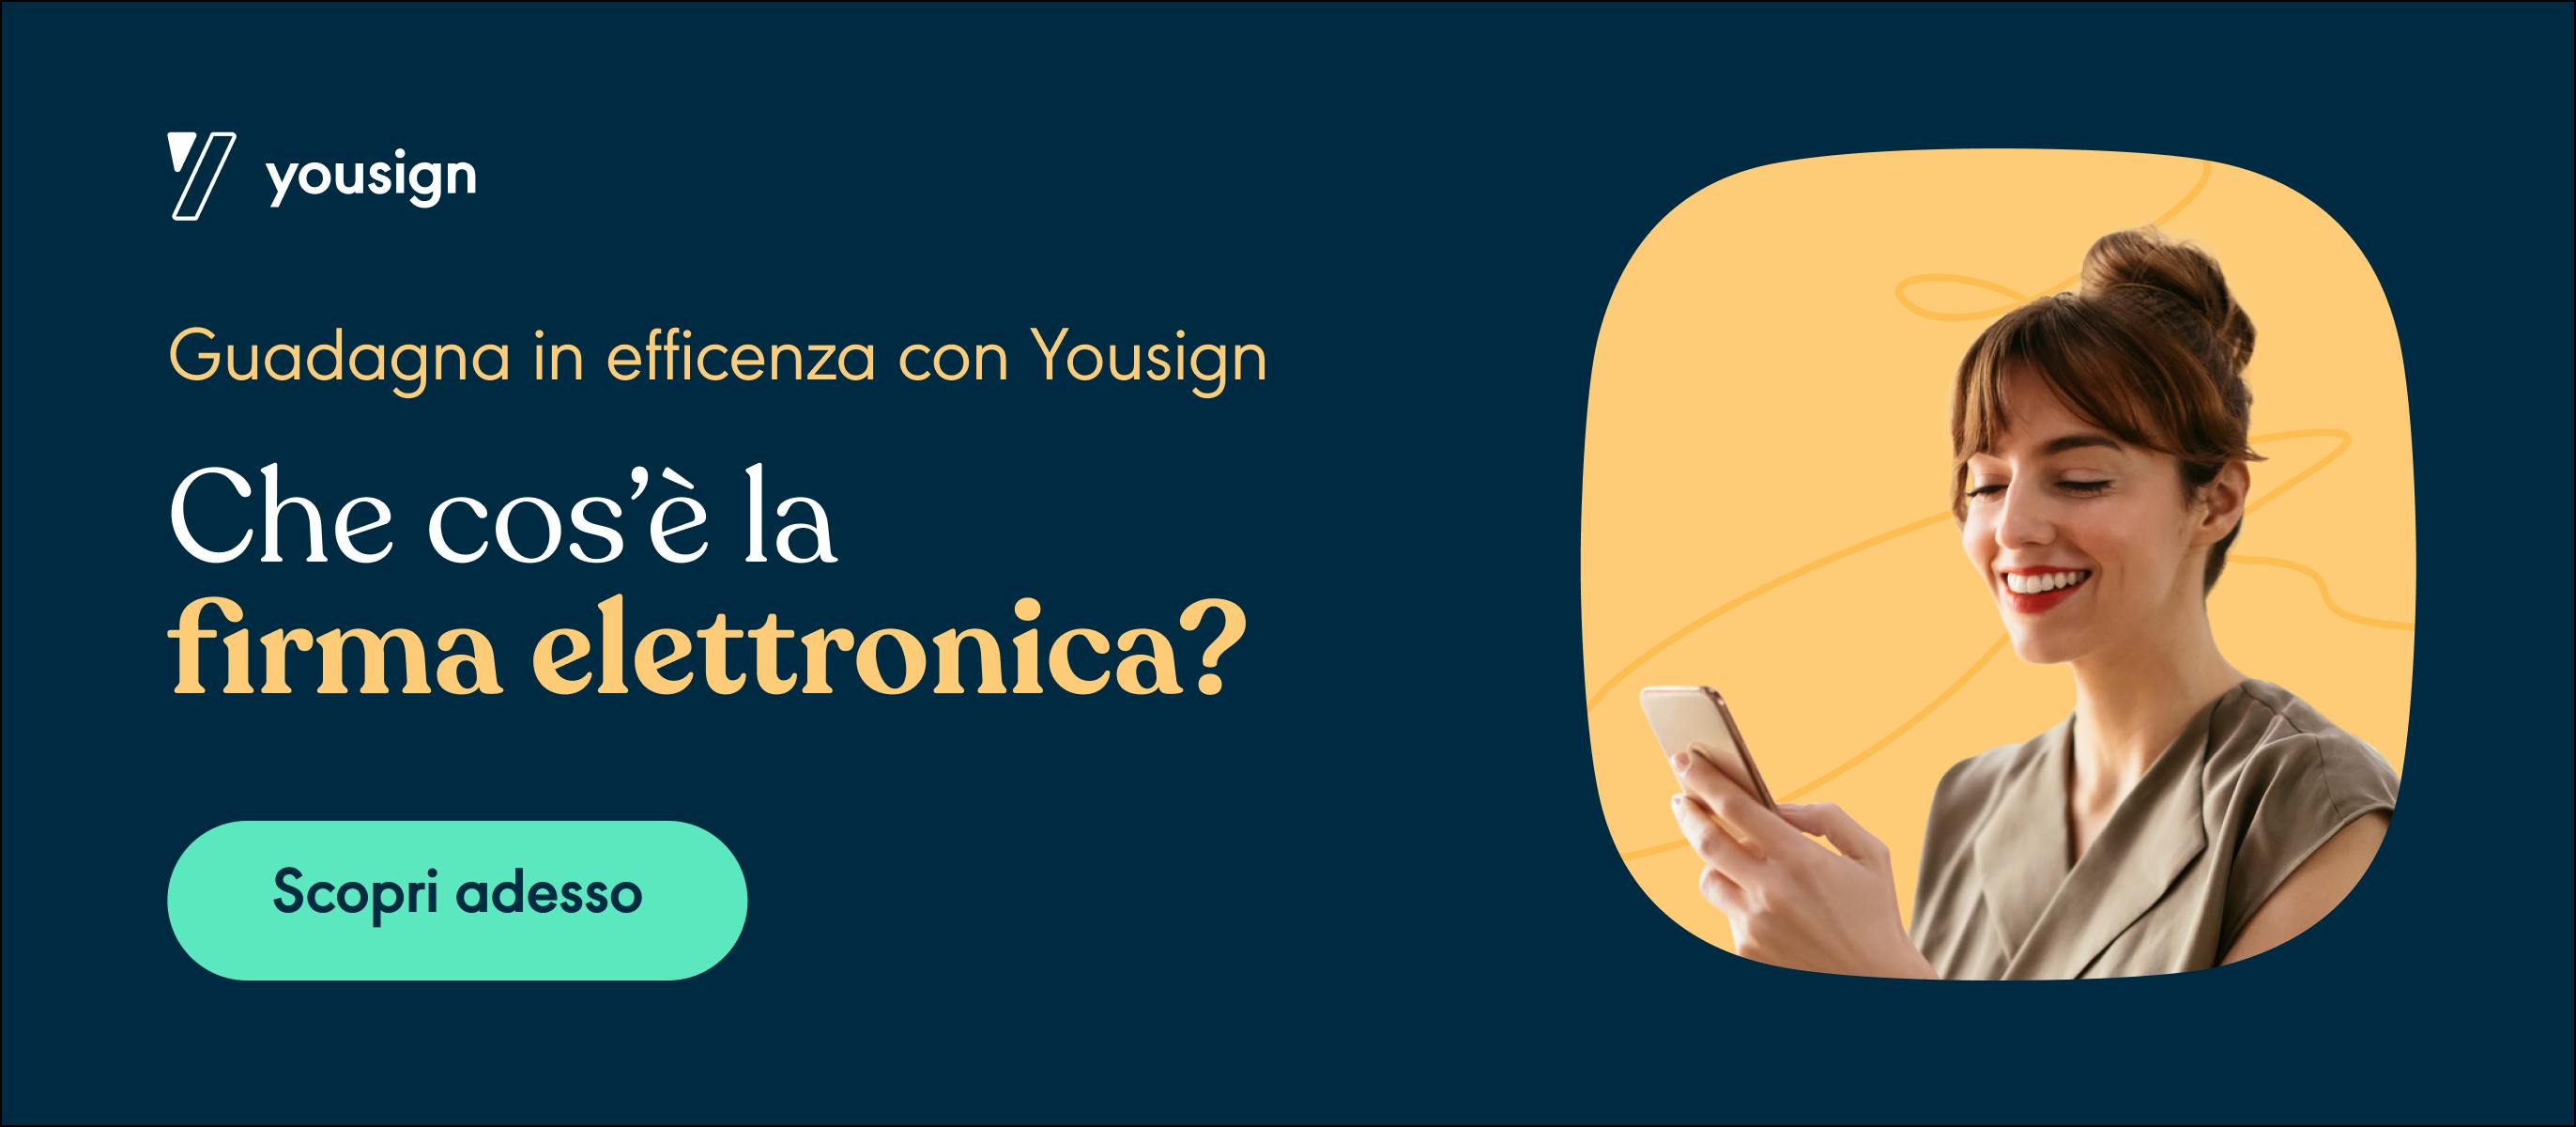  firma elettronica Yousign